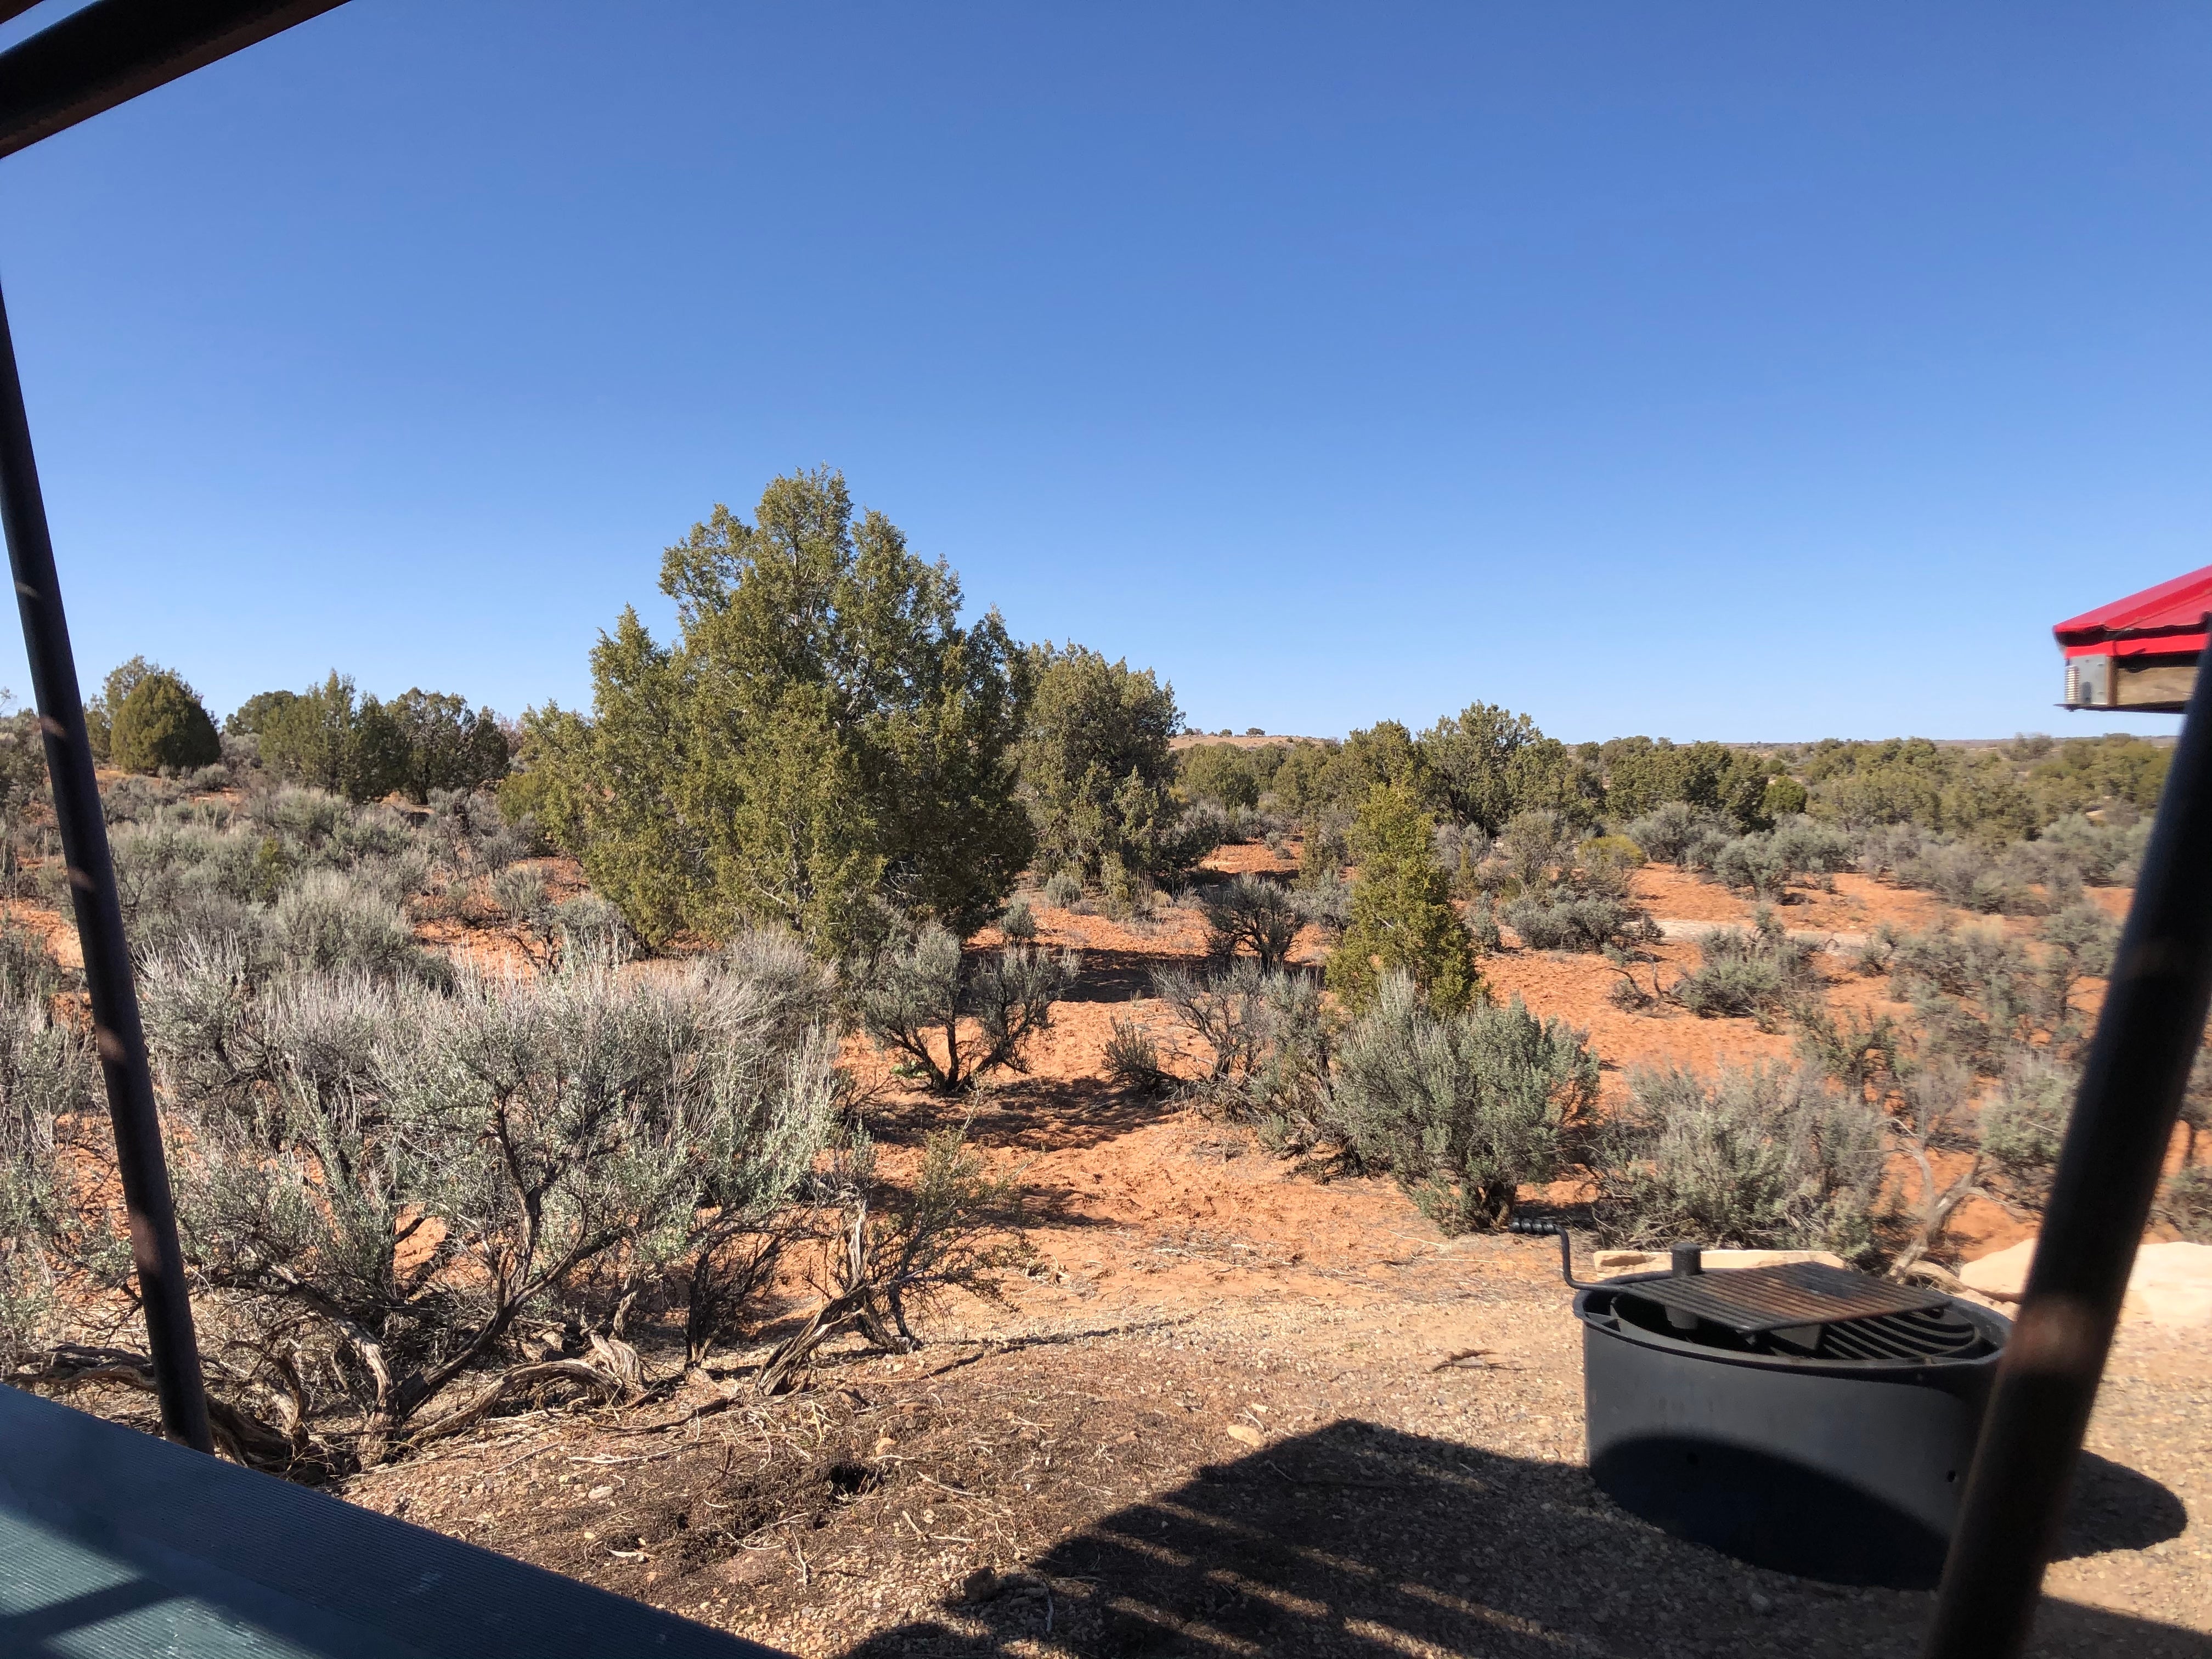 Camper submitted image from Hovenweep National Monument - 5